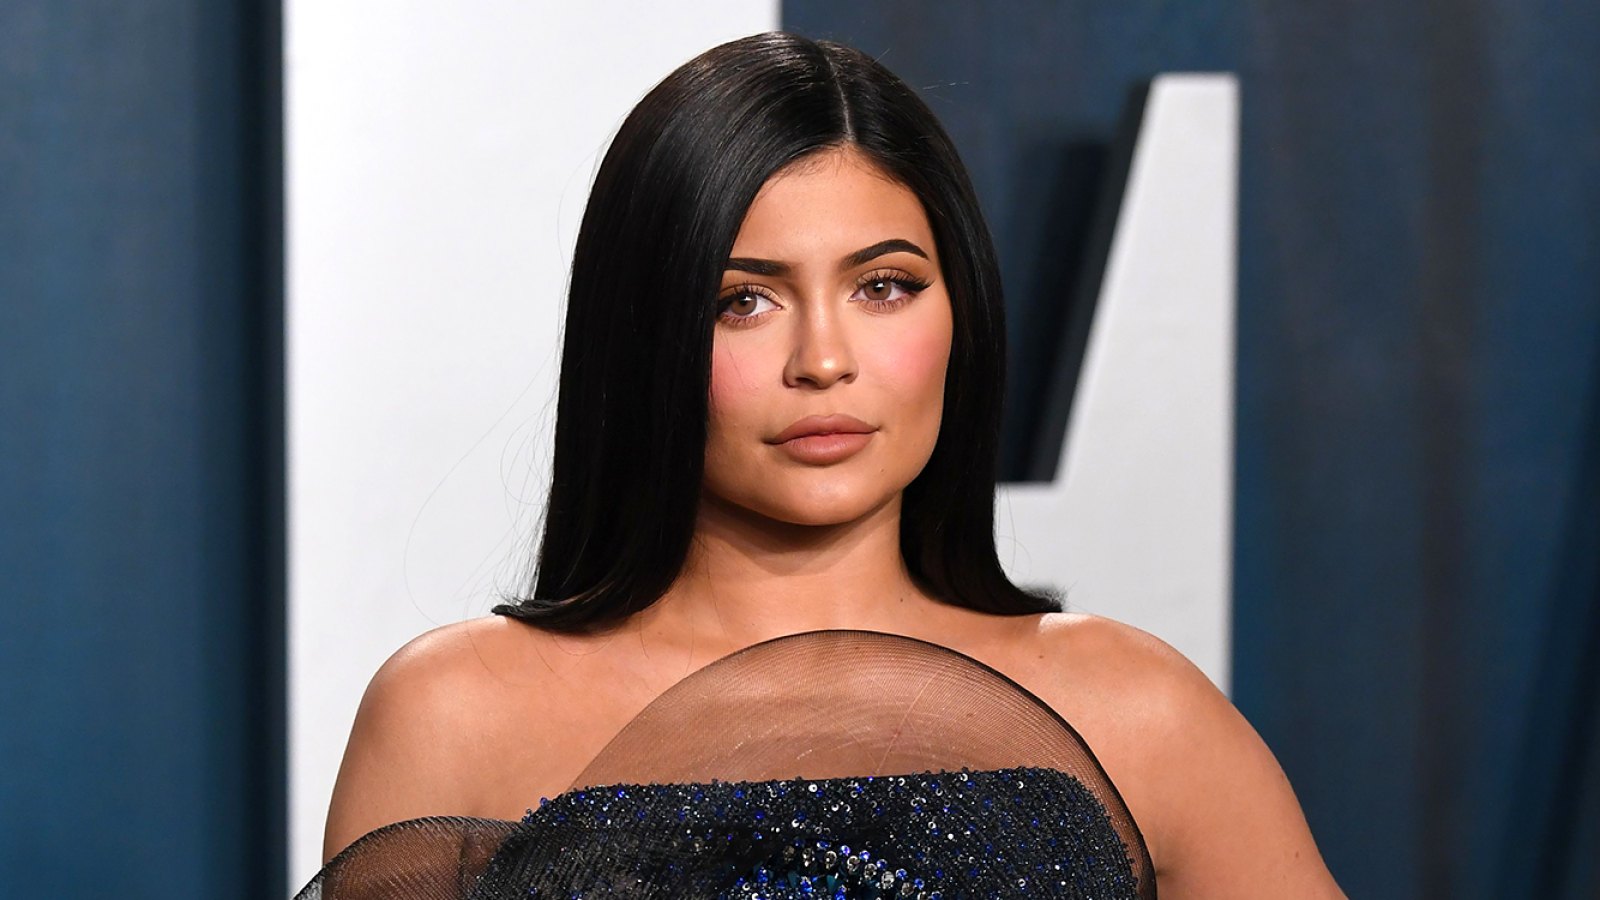 Fans Are Slamming Kylie Jenner’s Swim Line for ‘Cheap’ and ‘See-Through’ Material